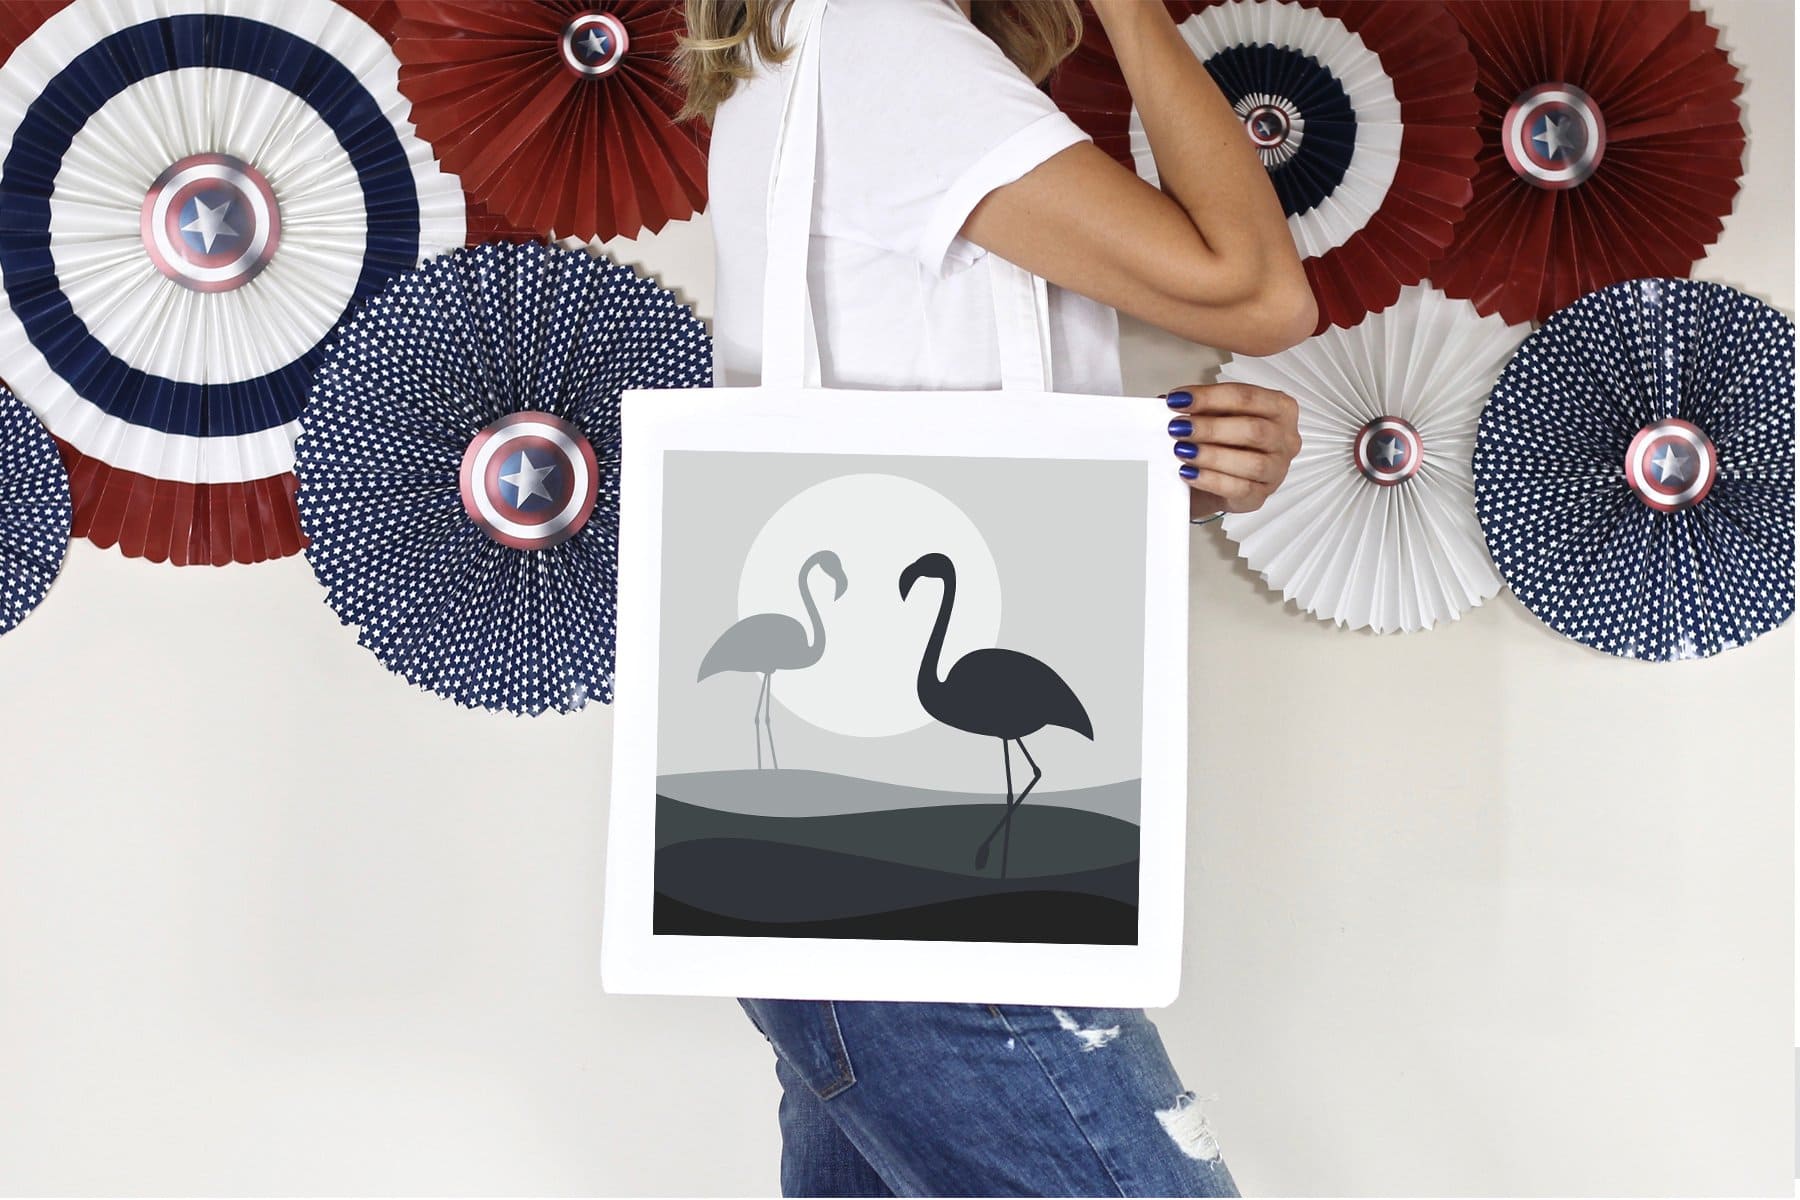 Gray and black flamingos are depicted on the white bag.